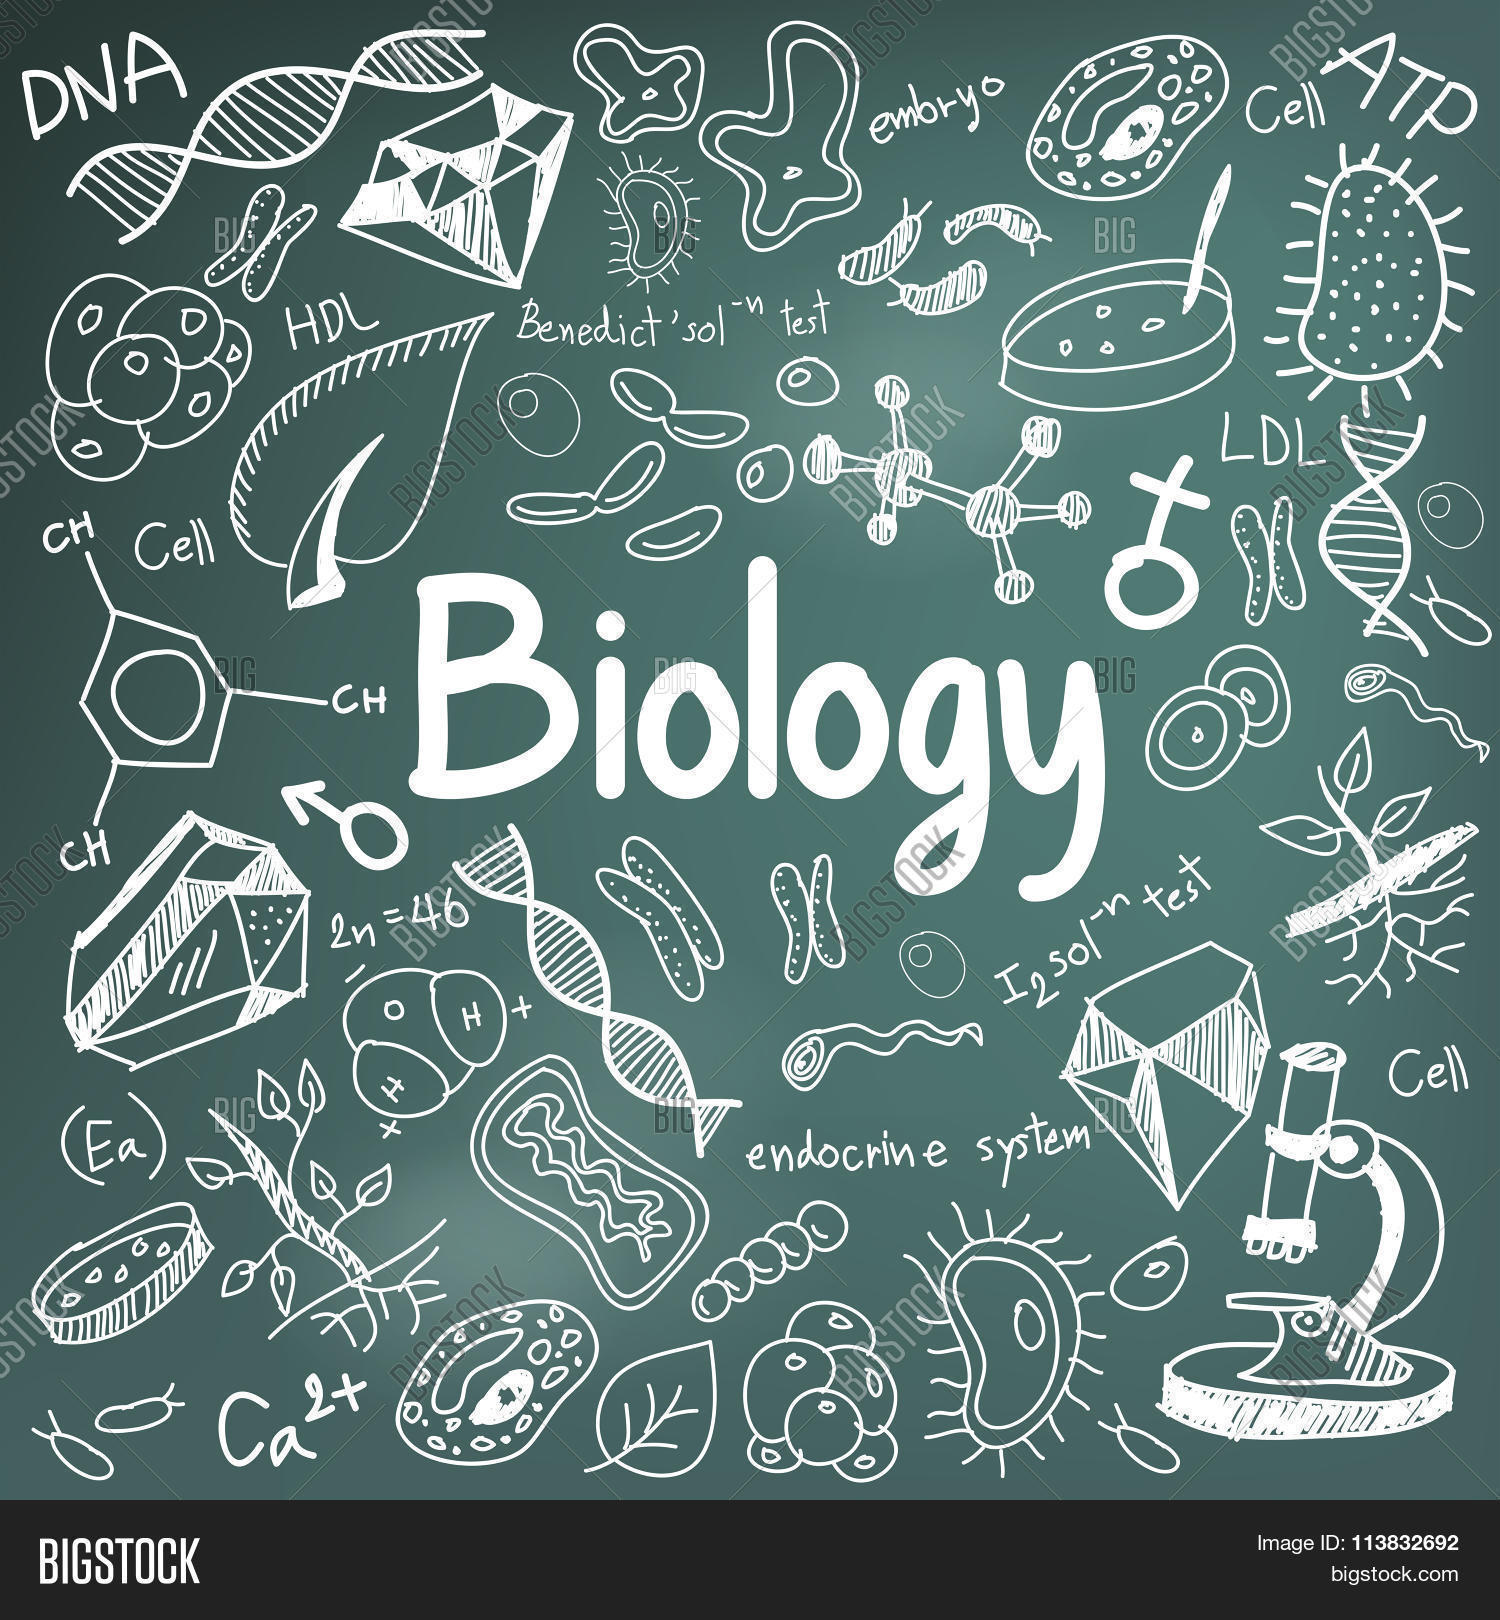 Biology Science Vector Photo Free Trial Bigstock